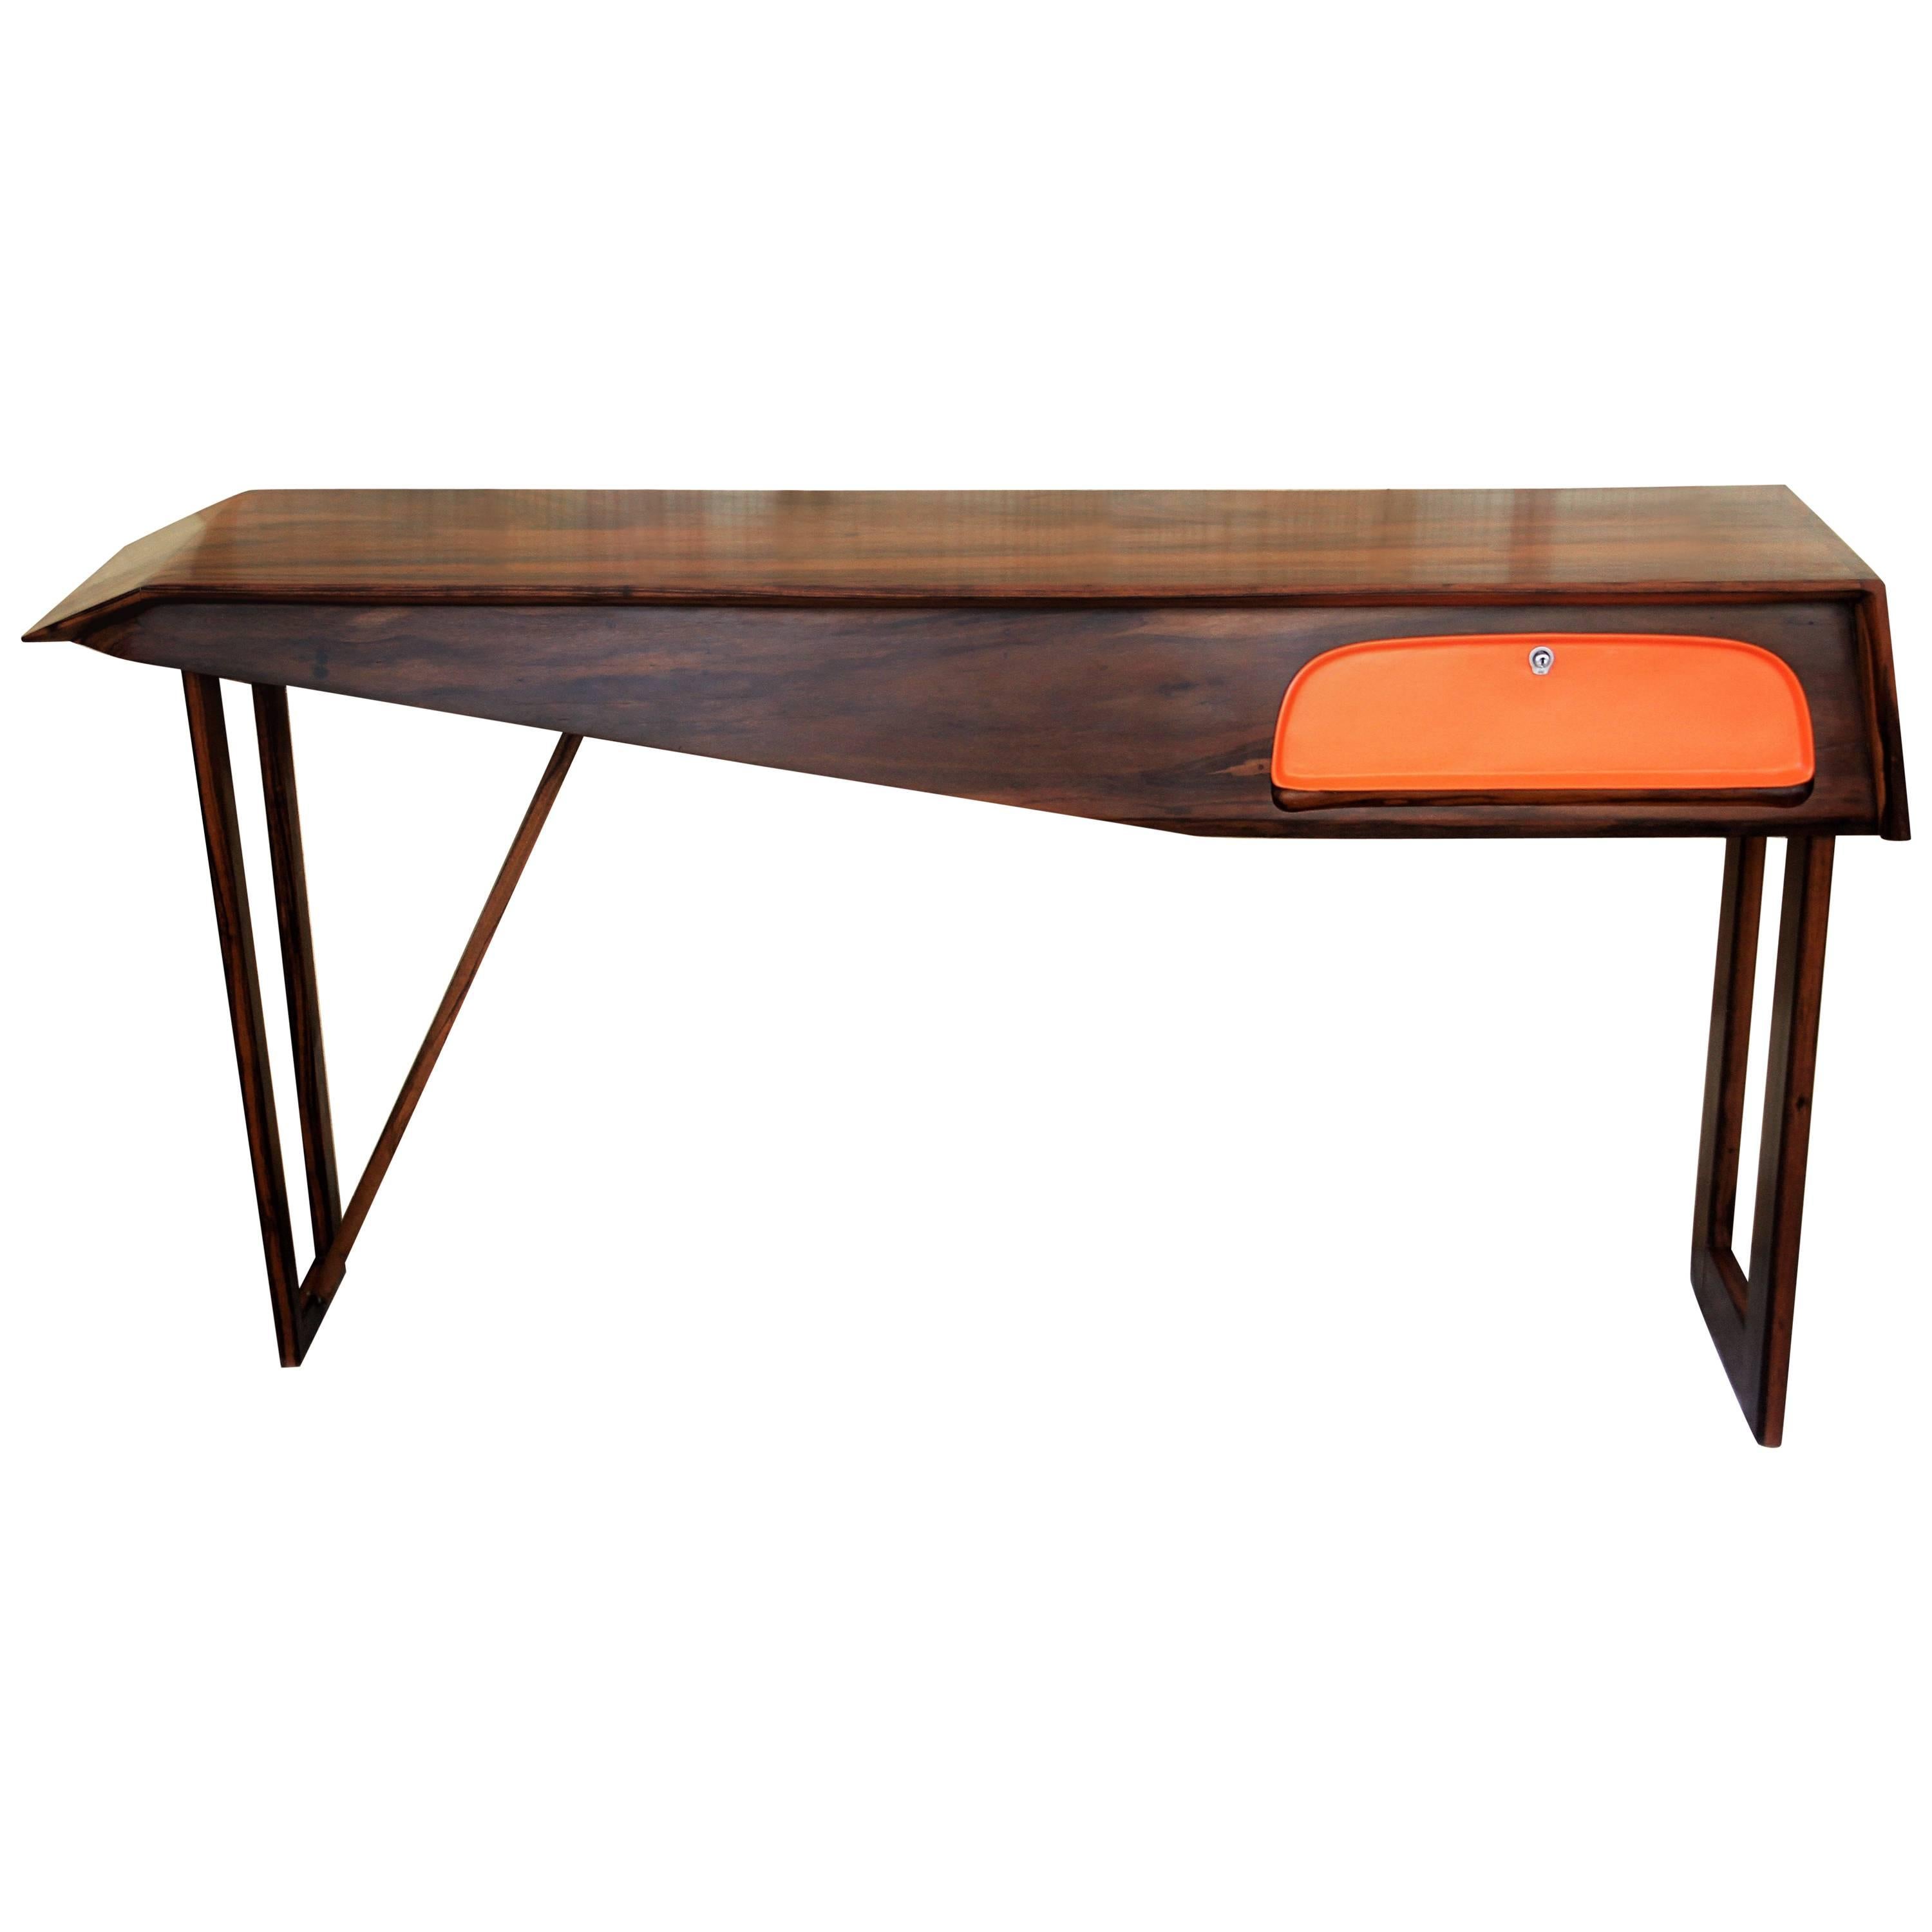 Modern Console Table in Hardwood and Steel, Brazilian Design, Single Edition For Sale